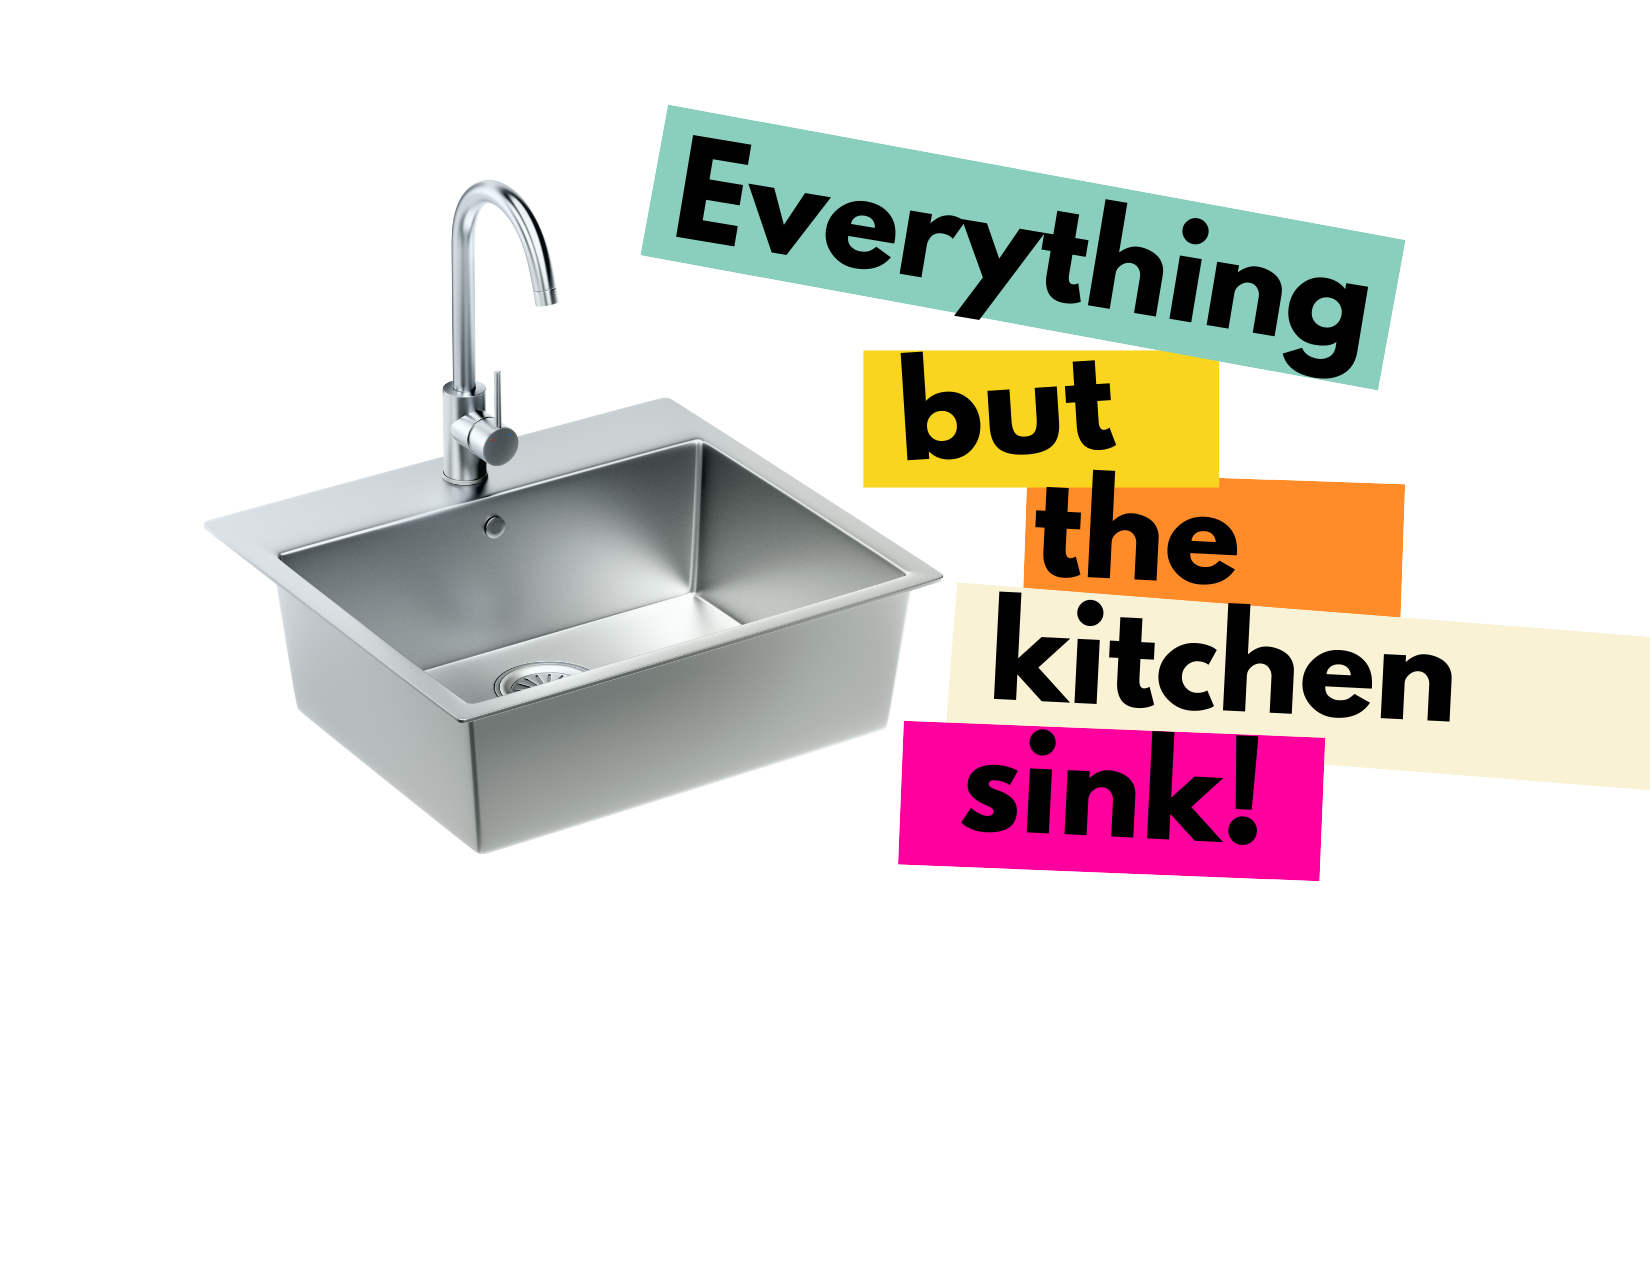 A picture of a sink with the words "everything but the kitchen sink"